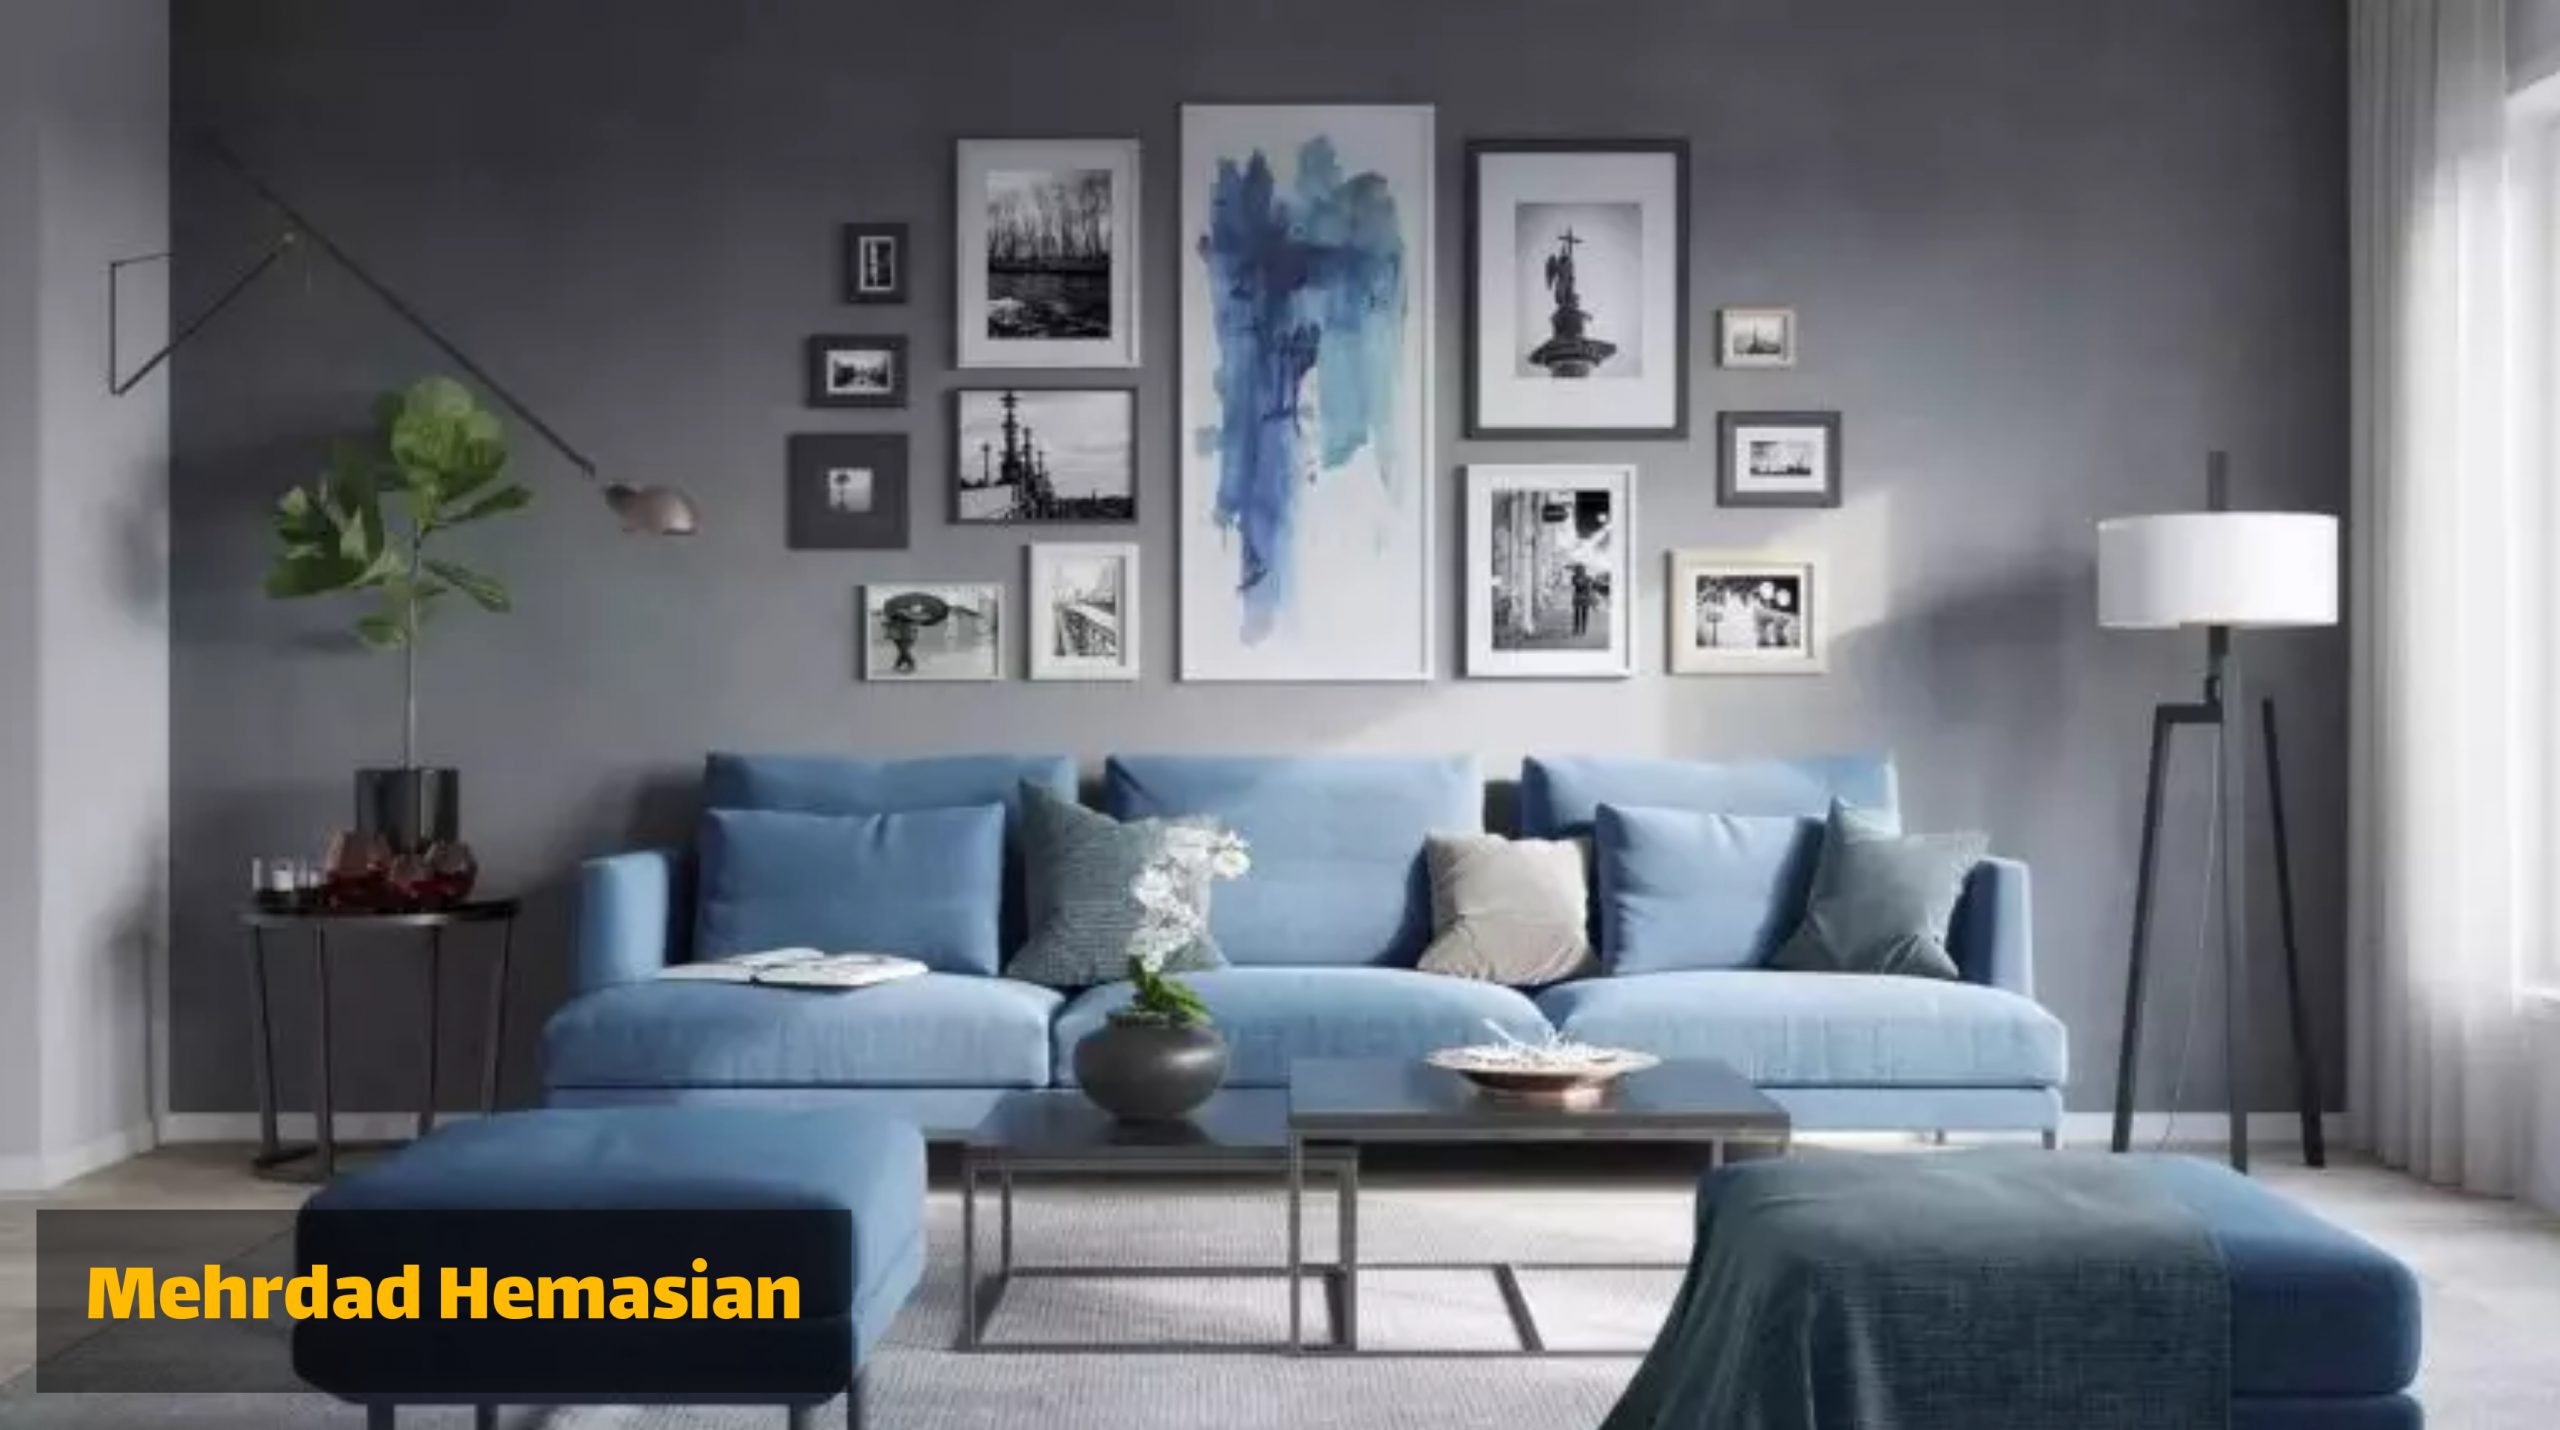 Psychology of colors in interior decoration / Psychology of blue